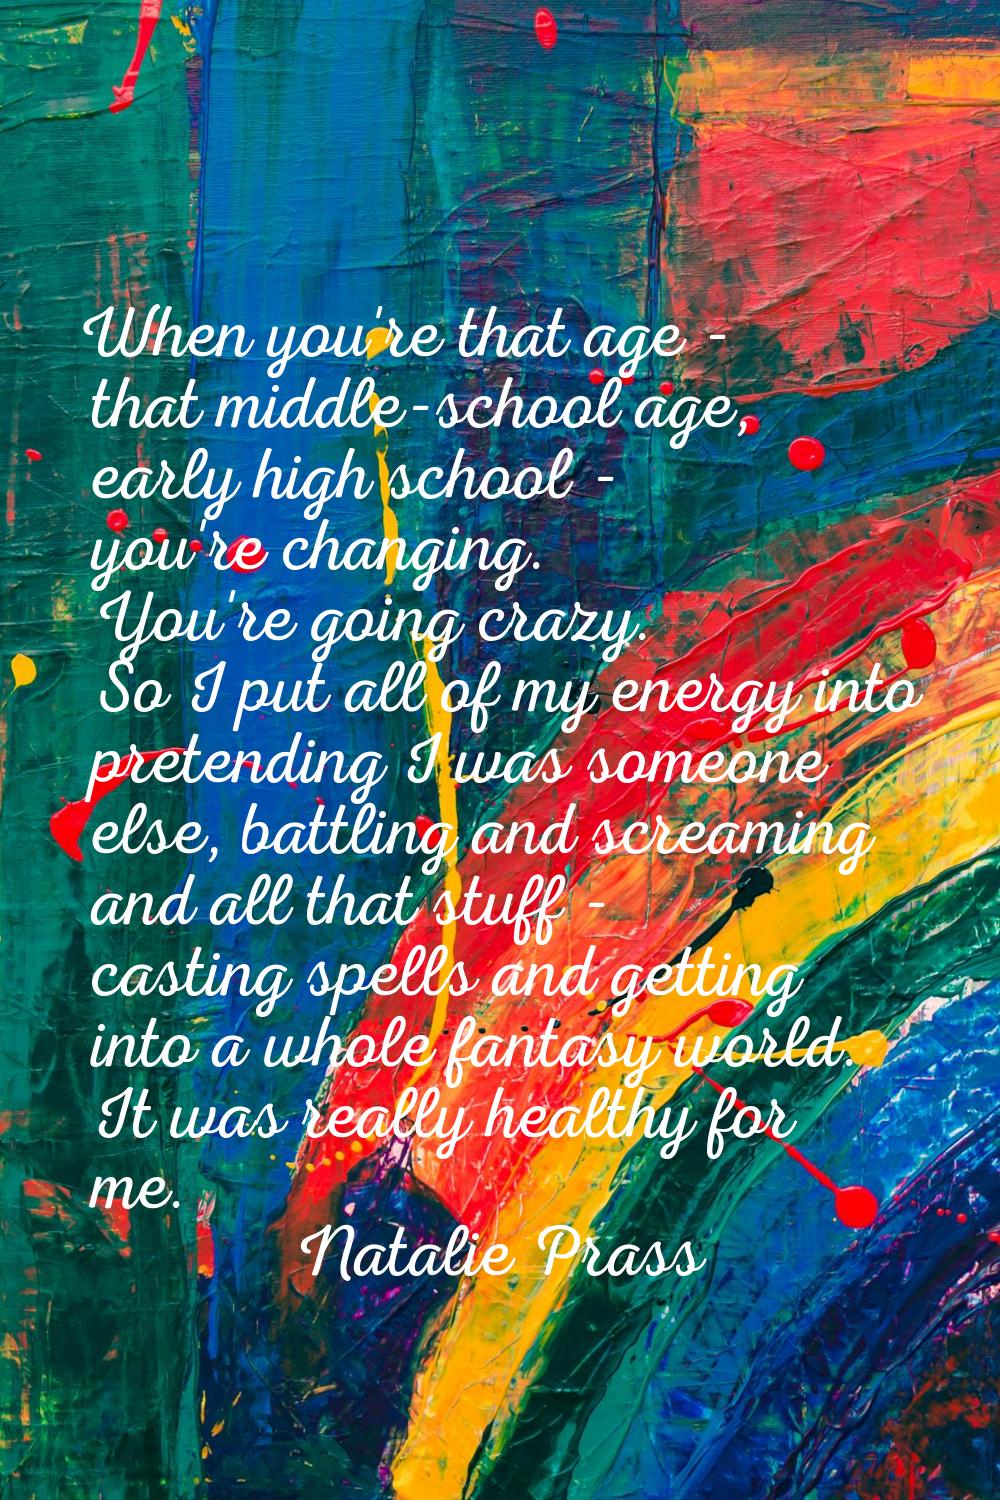 When you're that age - that middle-school age, early high school - you're changing. You're going cr